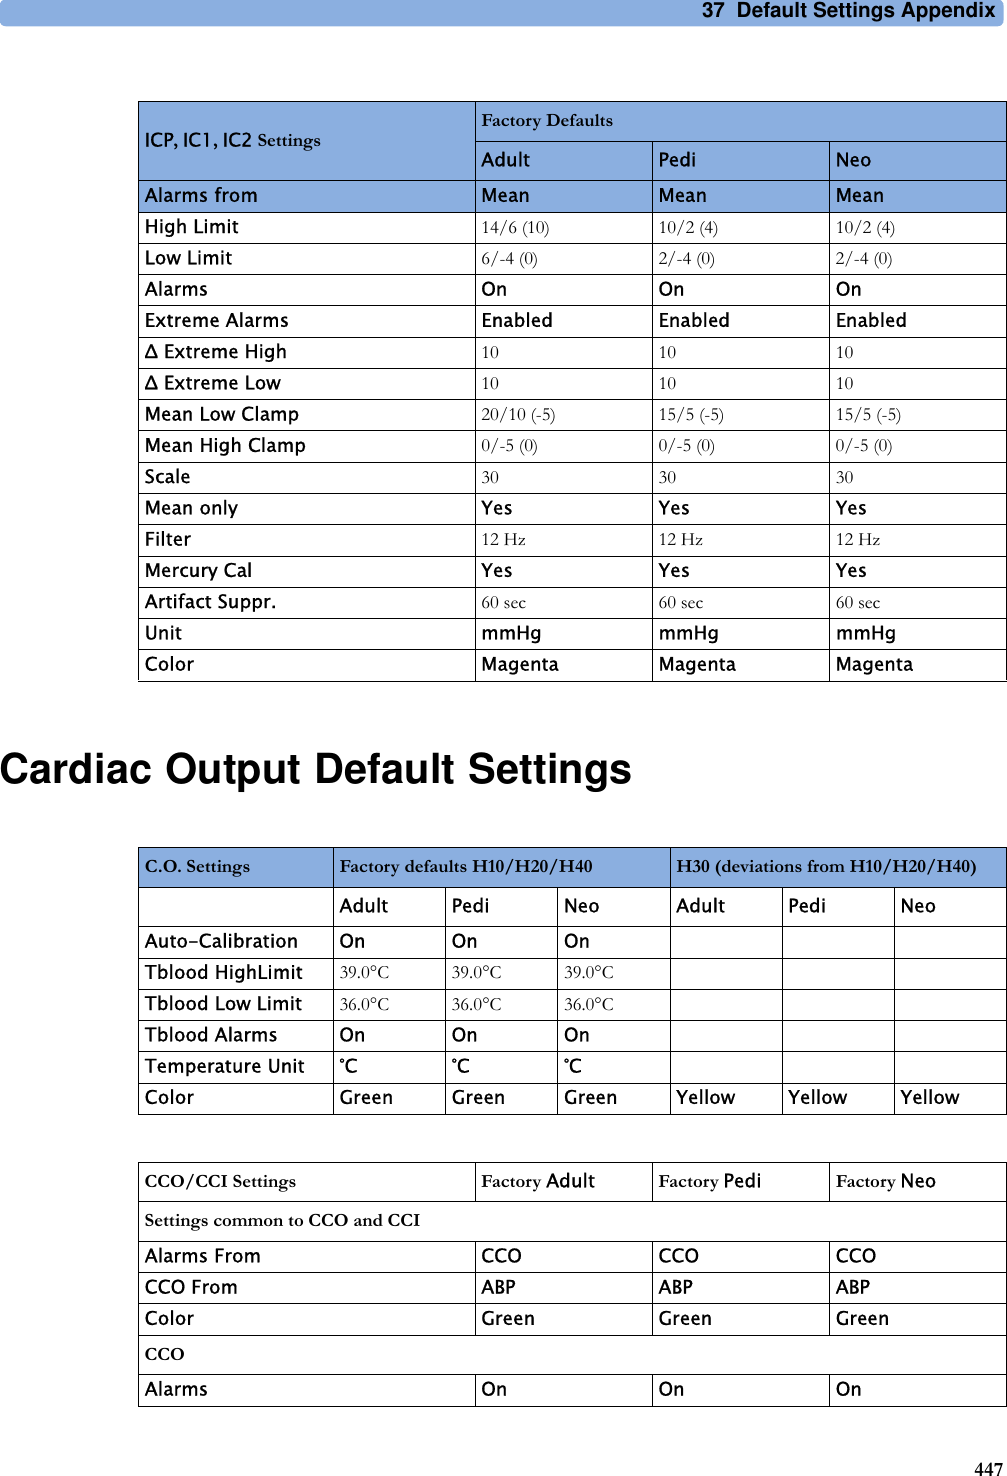 37 Default Settings Appendix447Cardiac Output Default SettingsICP, IC1, IC2 SettingsFactory DefaultsAdult Pedi NeoAlarms from Mean Mean MeanHigh Limit 14/6 (10) 10/2 (4) 10/2 (4)Low Limit 6/-4 (0) 2/-4 (0) 2/-4 (0)Alarms On On OnExtreme Alarms Enabled Enabled EnabledΔ Extreme High 10 10 10Δ Extreme Low 10 10 10Mean Low Clamp 20/10 (-5) 15/5 (-5) 15/5 (-5)Mean High Clamp 0/-5 (0) 0/-5 (0) 0/-5 (0)Scale 30 30 30Mean only Yes Yes YesFilter 12 Hz 12 Hz 12 HzMercury Cal Yes Yes YesArtifact Suppr. 60 sec 60 sec 60 secUnit mmHg mmHg mmHgColor Magenta Magenta MagentaC.O. Settings Factory defaults H10/H20/H40 H30 (deviations from H10/H20/H40)Adult Pedi Neo Adult Pedi NeoAuto-Calibration On On OnTblood HighLimit 39.0°C 39.0°C 39.0°CTblood Low Limit 36.0°C 36.0°C 36.0°CTblood Alarms On On OnTemperature Unit °C °C °CColor Green Green Green Yellow Yellow YellowCCO/CCI Settings Factory Adult Factory Pedi Factory NeoSettings common to CCO and CCIAlarms From CCO CCO CCOCCO From ABP ABP ABPColor Green Green GreenCCOAlarms On On On